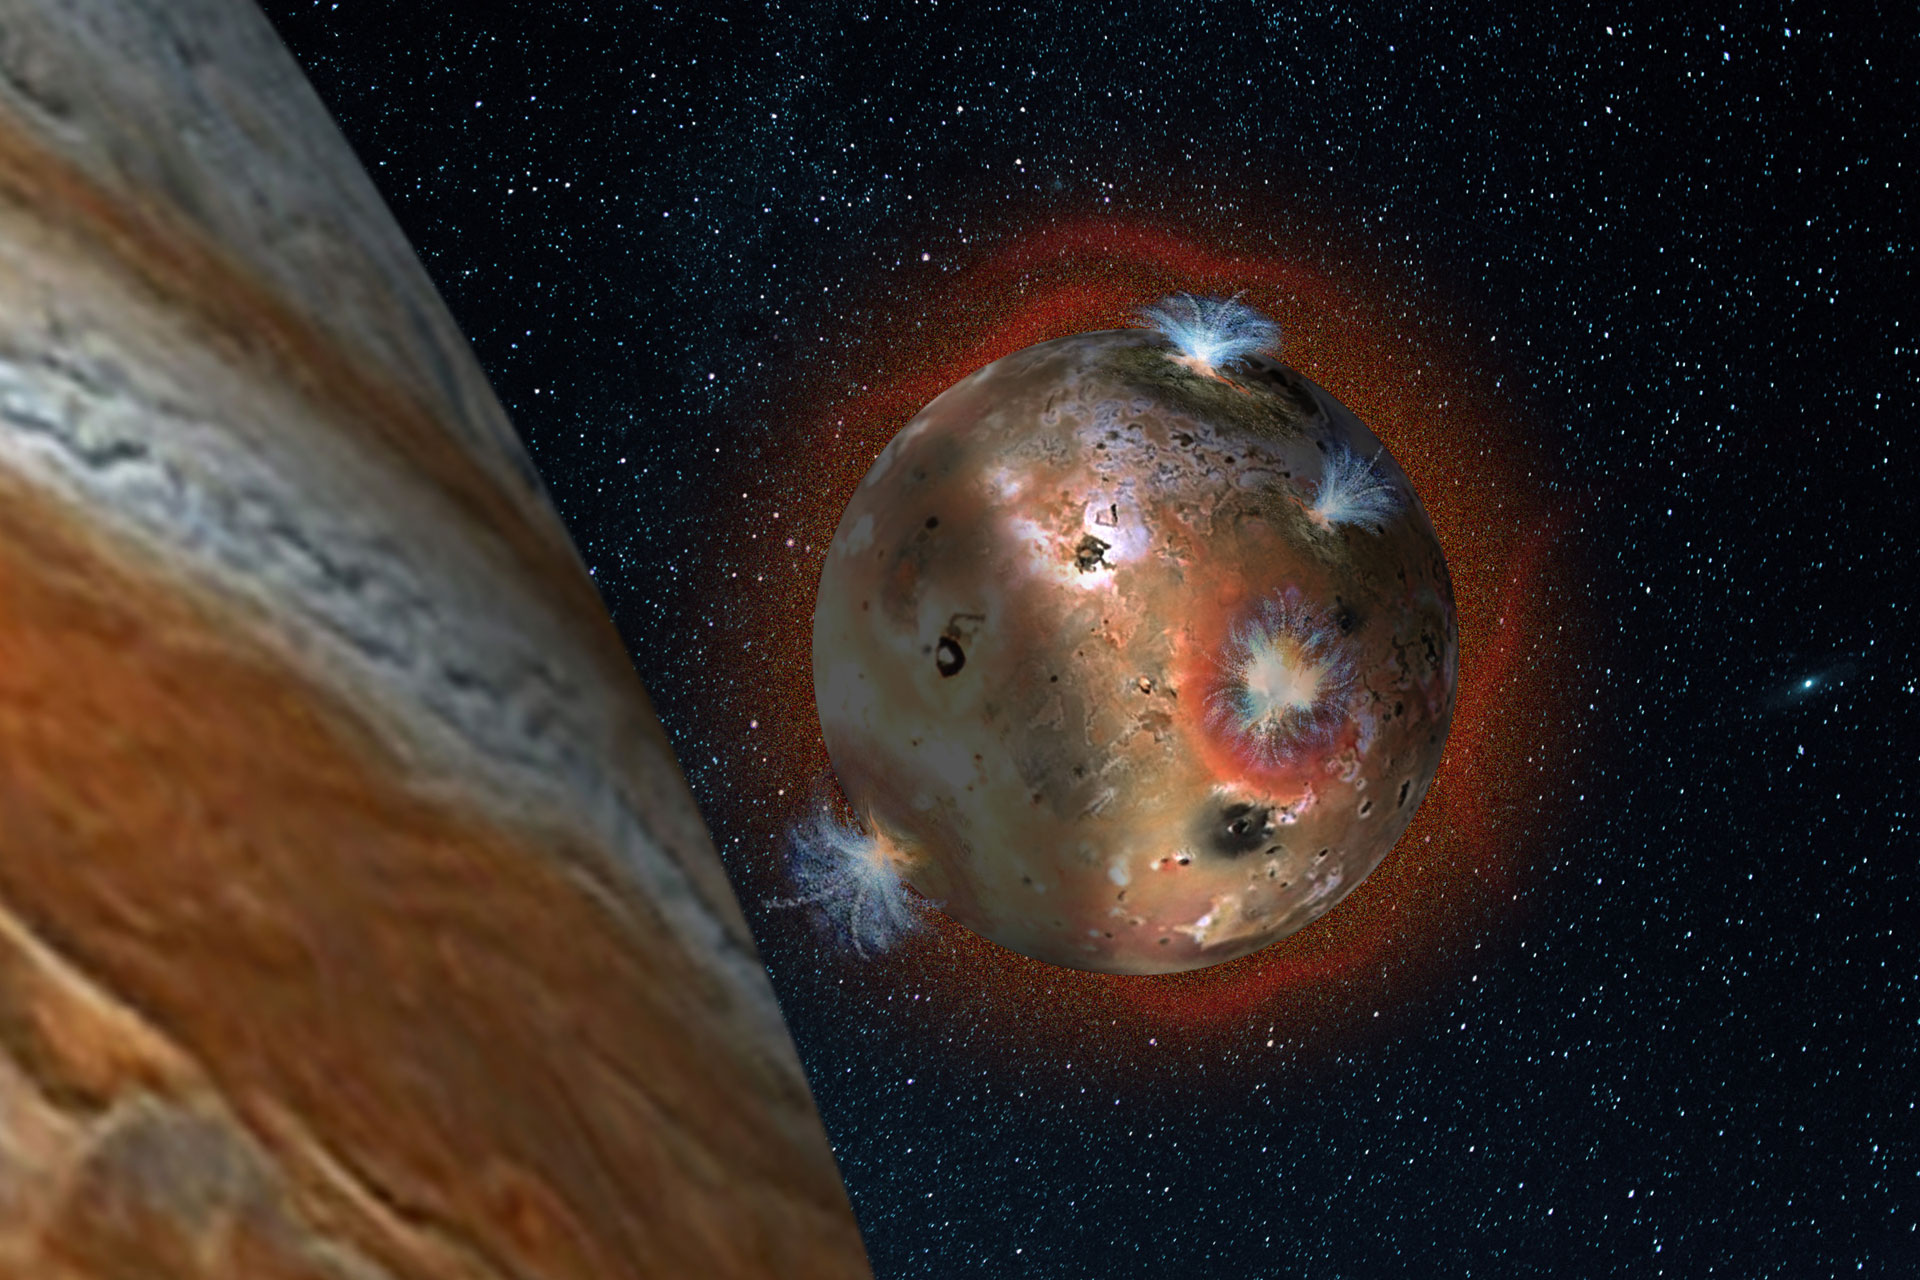 Astronomers Reveal Fluctuating Atmosphere of Jupiter's Volcanic Moon Io